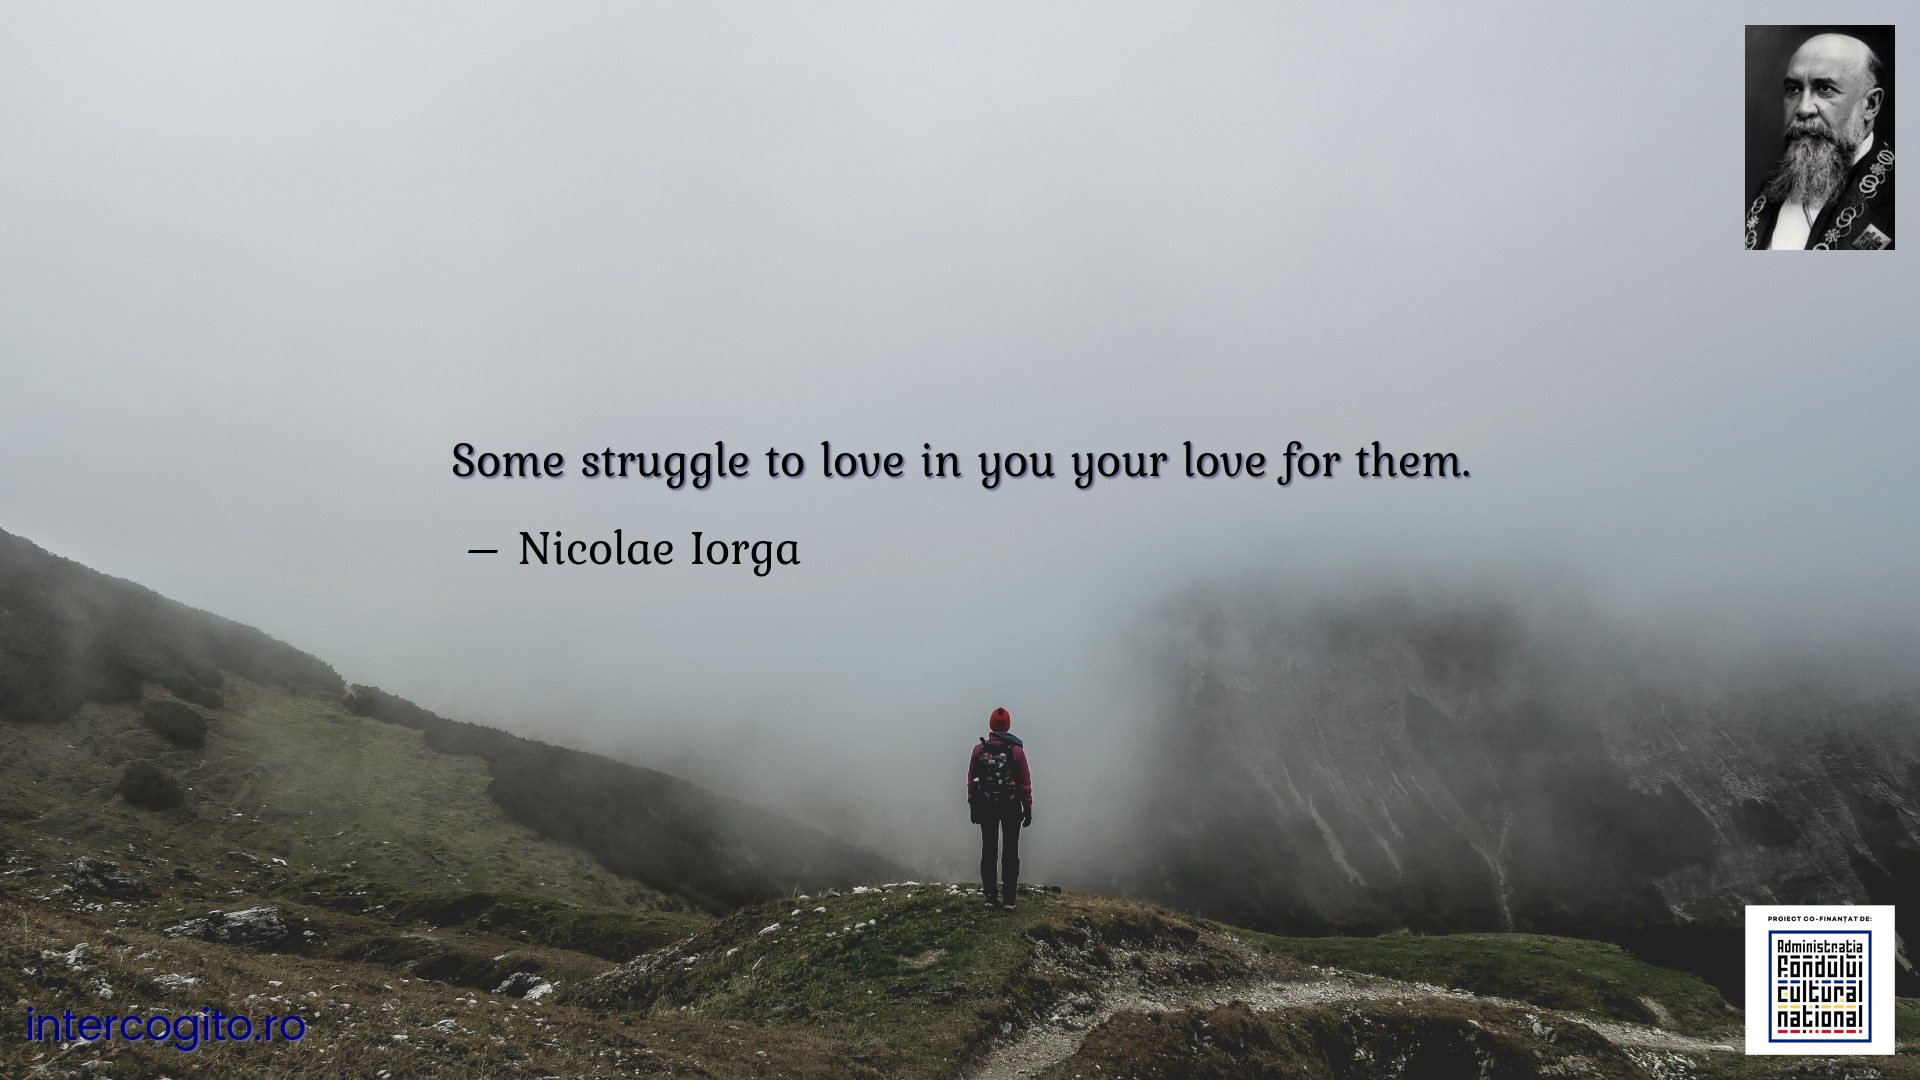 Some struggle to love in you your love for them.